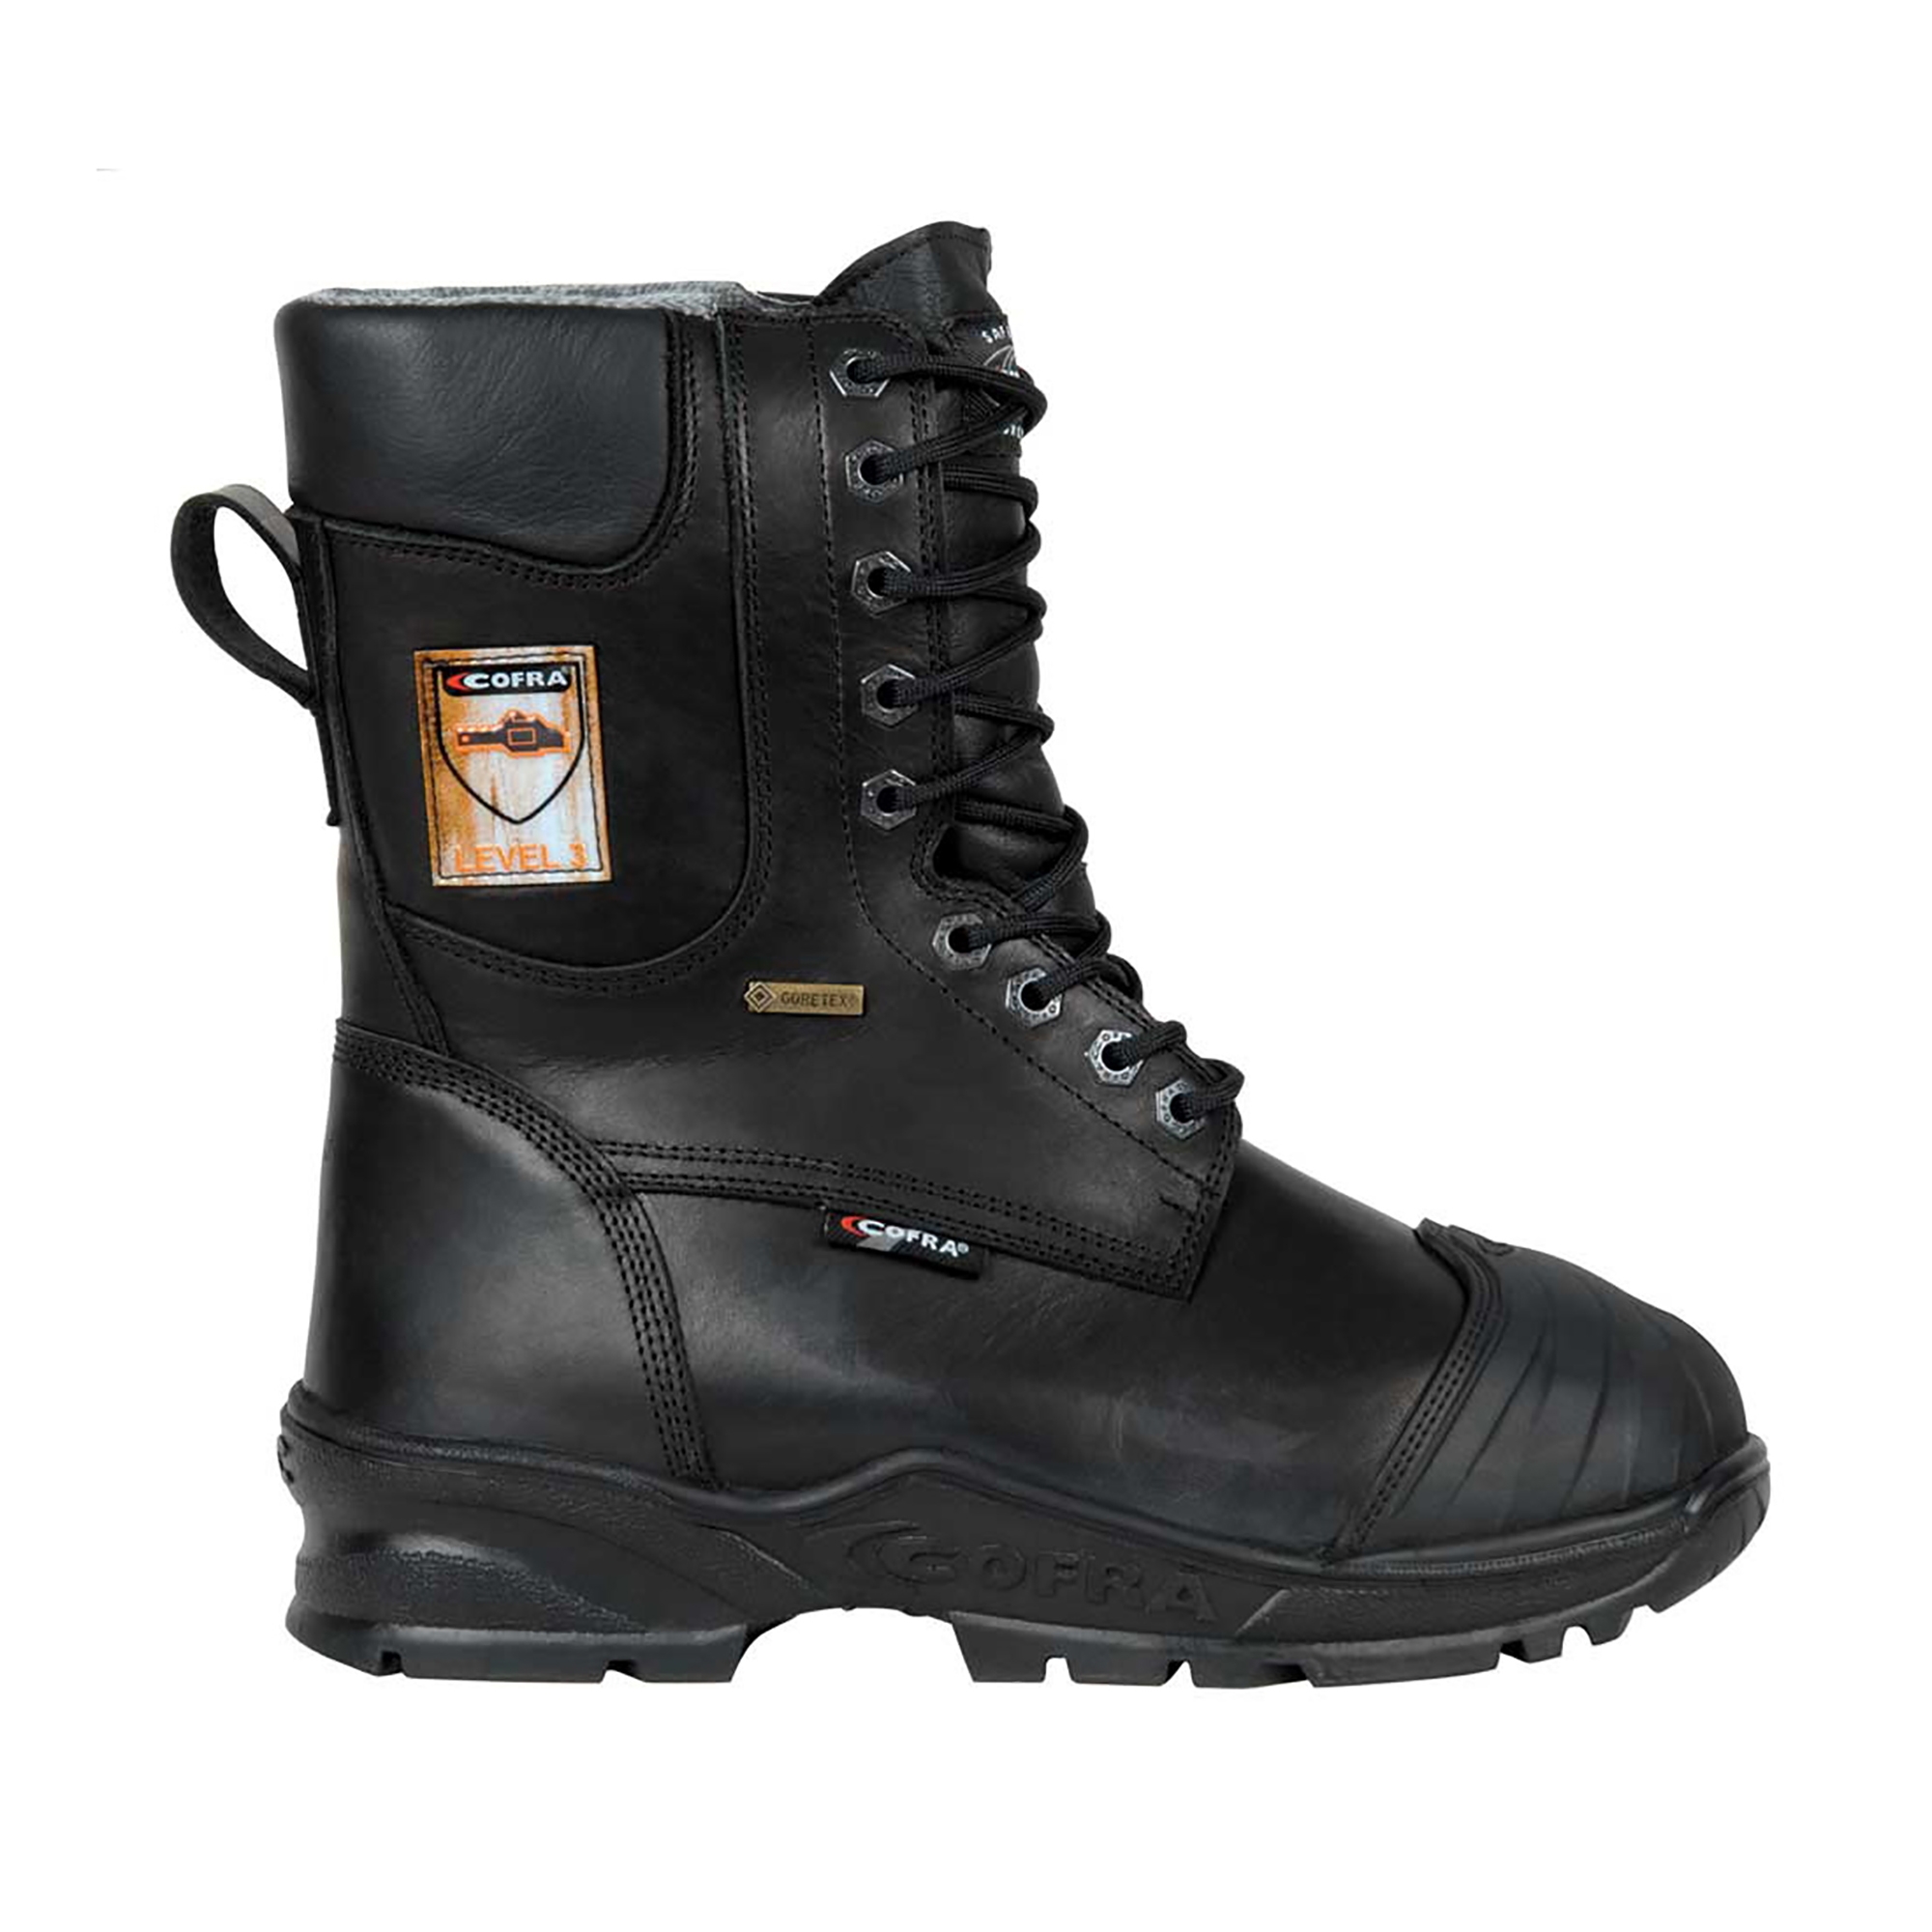 Cofra Cut Protection Boots Power Class 2 Forestry Boots Work Boots 